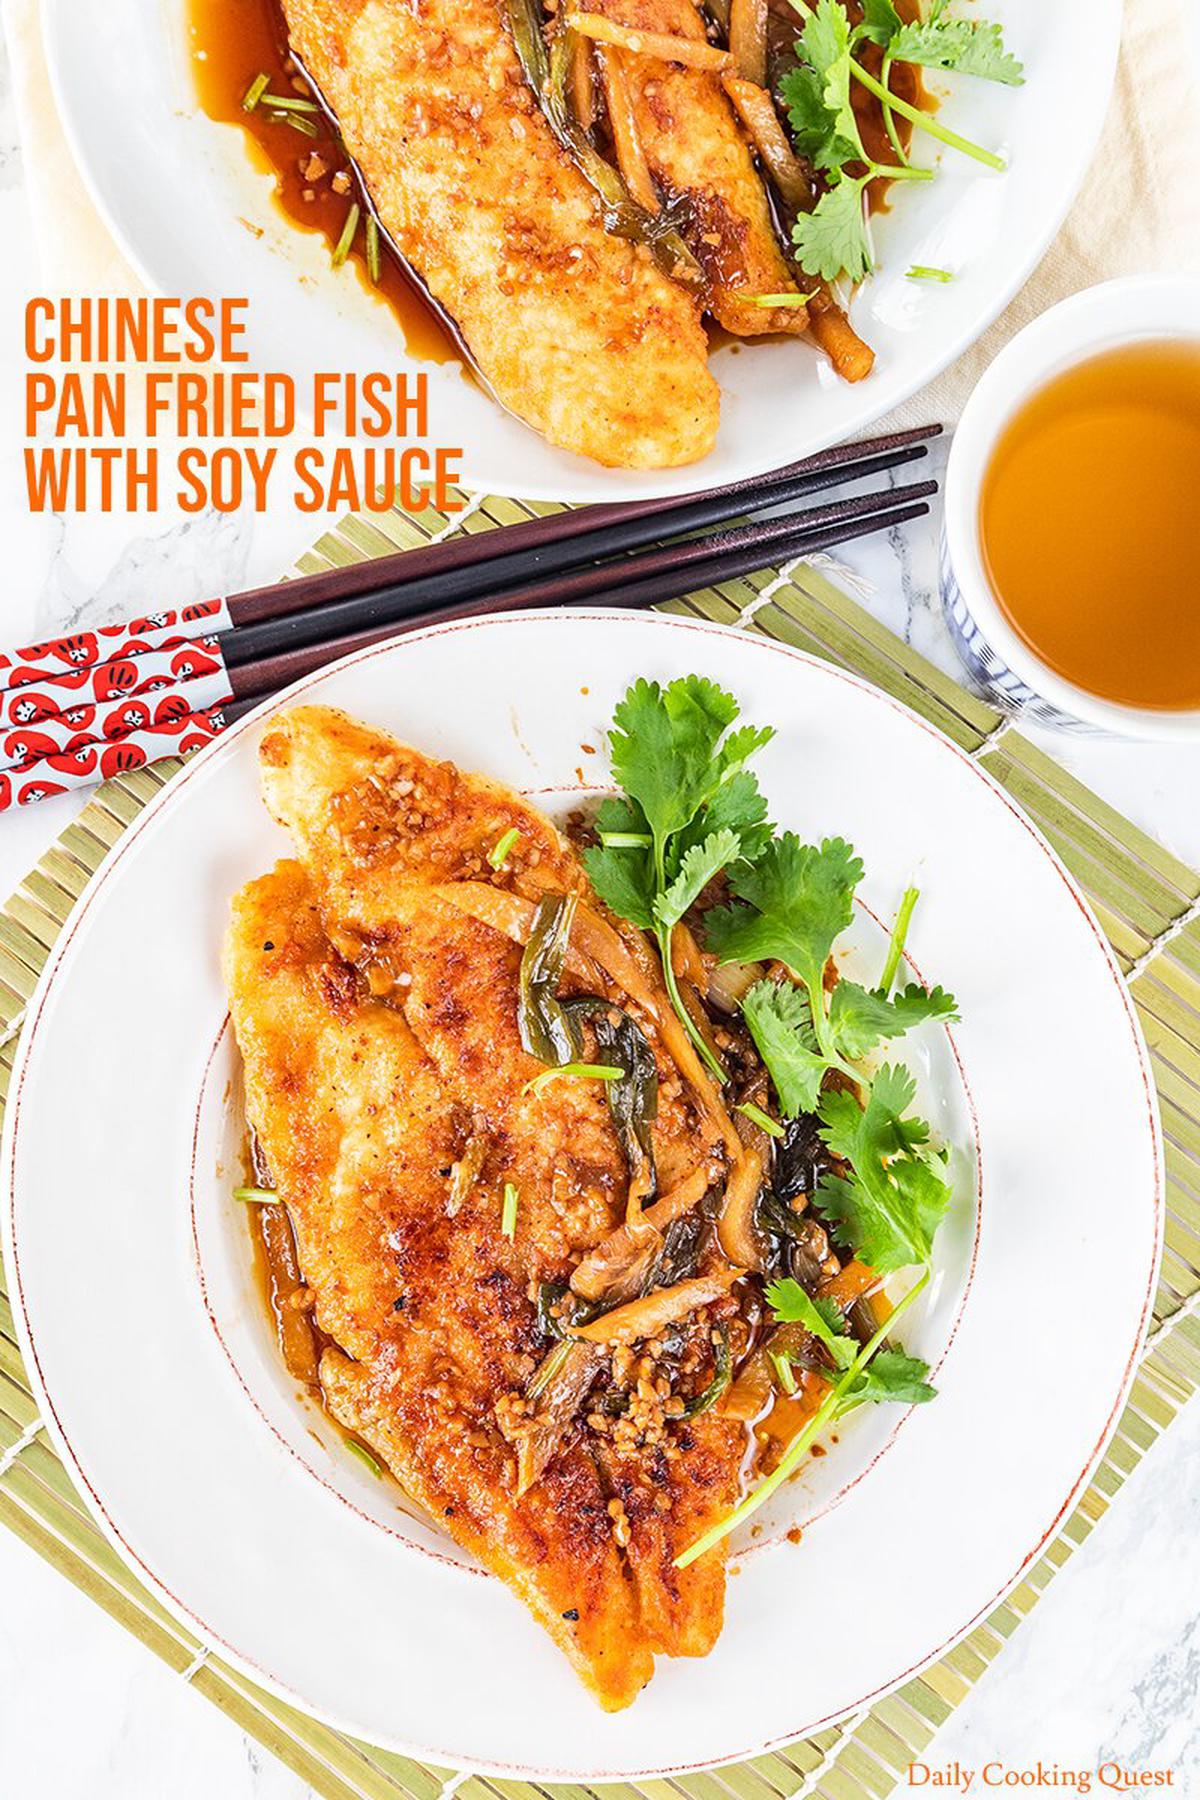 Chinese Pan Fried Fish with Soy Sauce